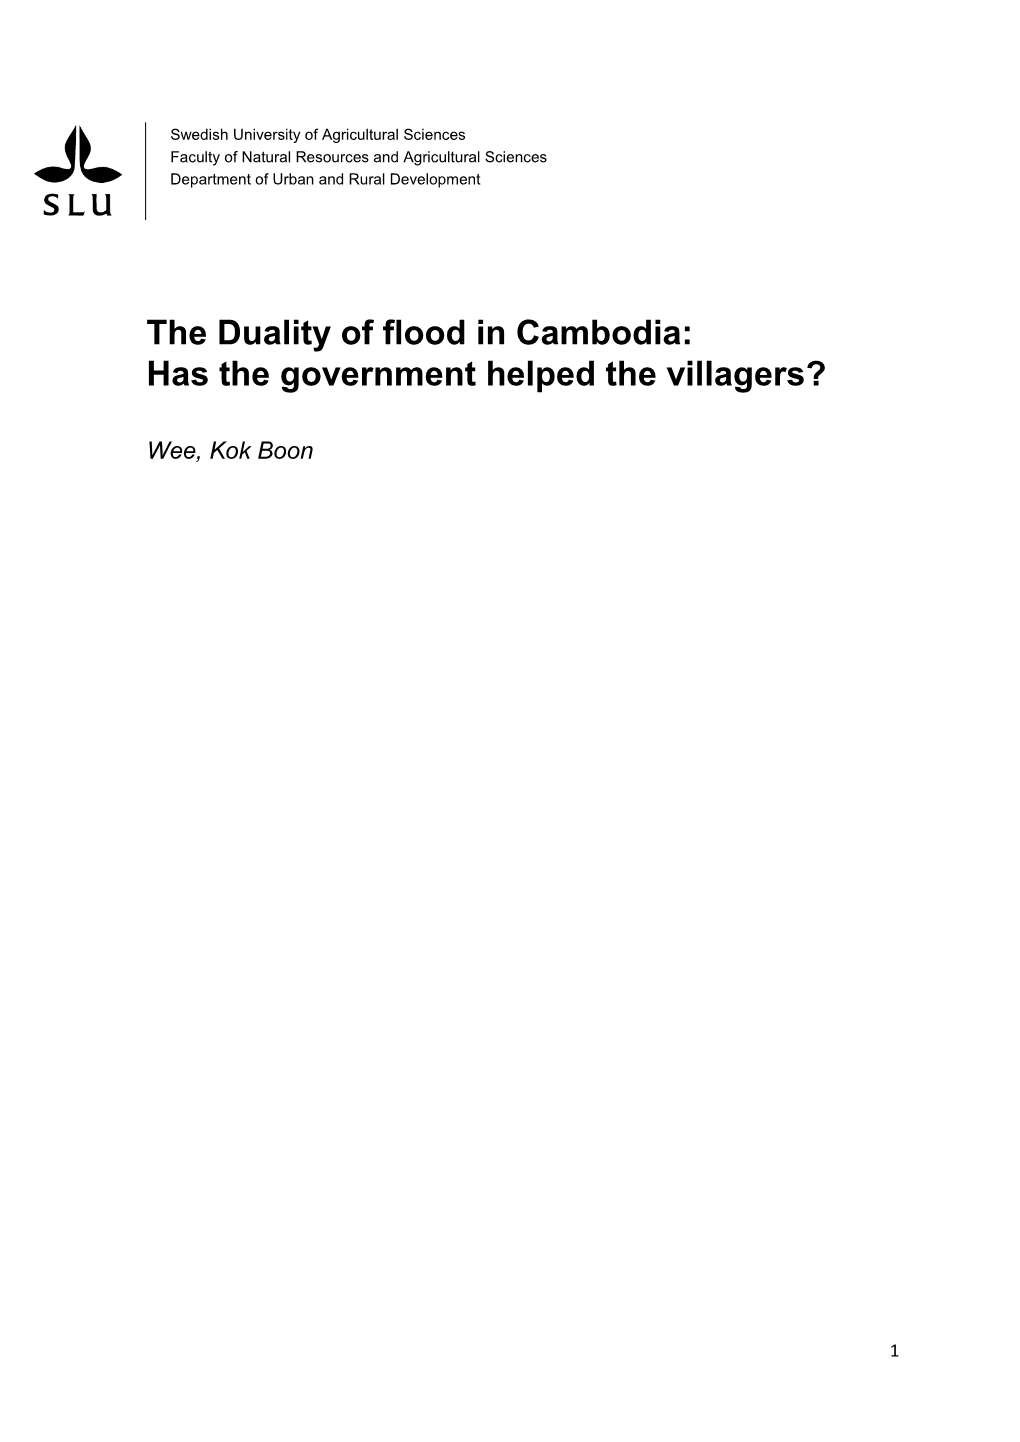 The Duality of Flood in Cambodia: Has the Government Helped the Villagers?